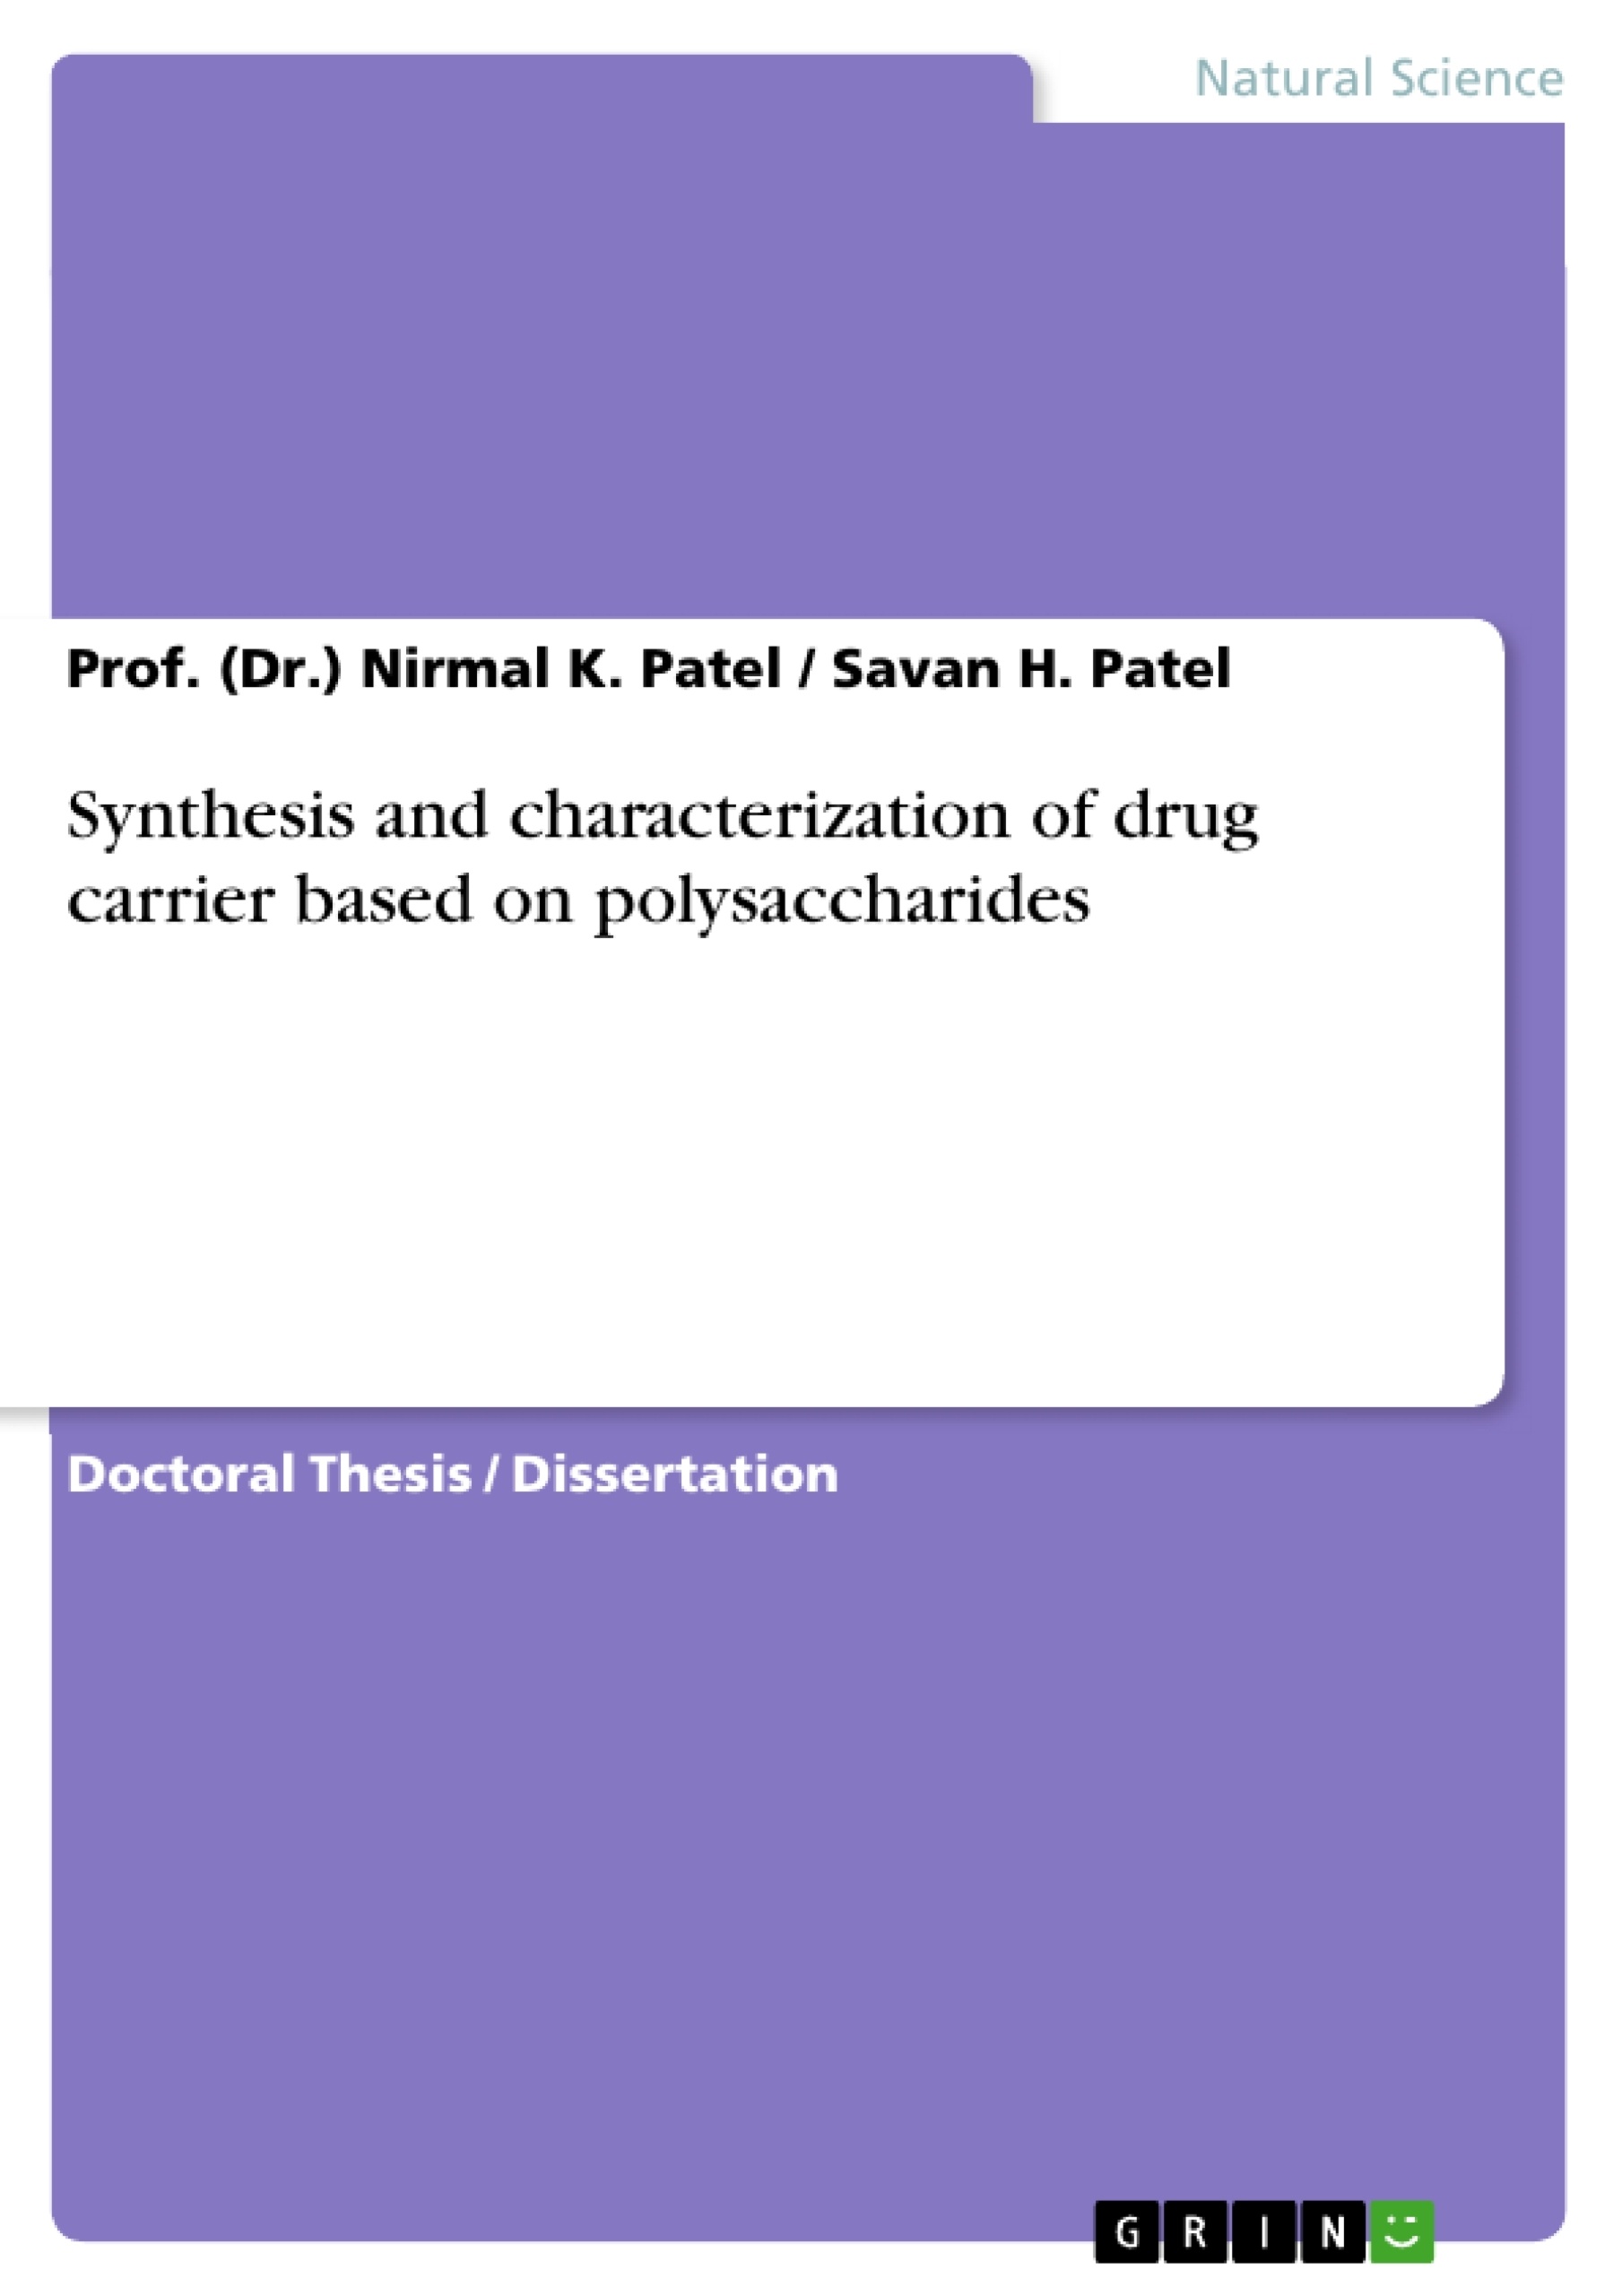 Title: Synthesis and characterization of drug carrier based on polysaccharides